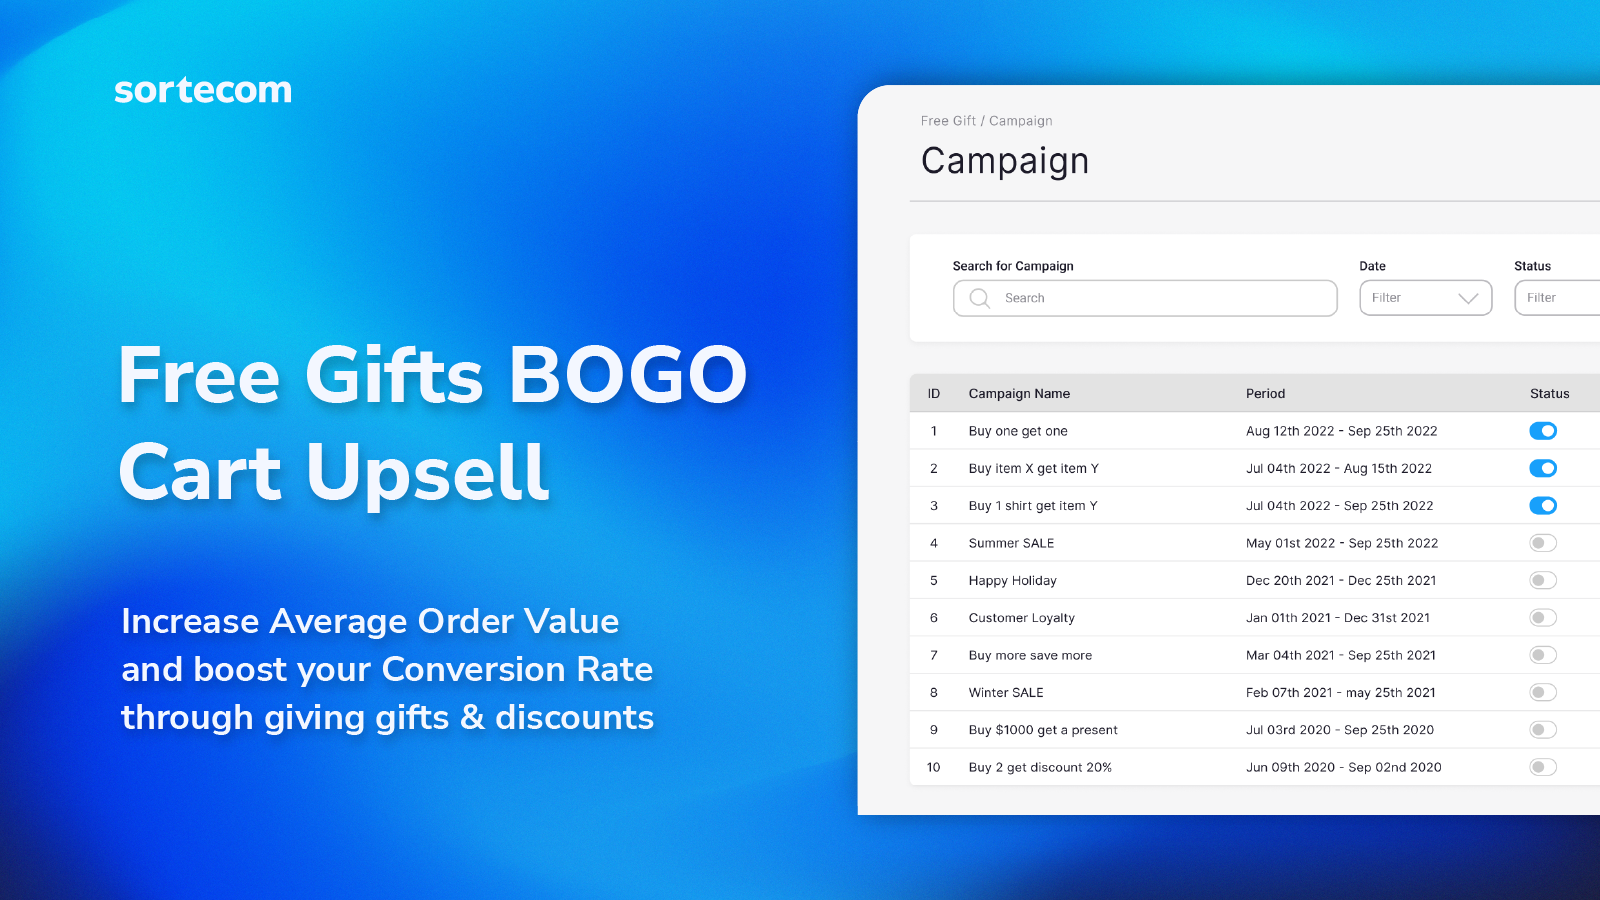 Setup and manage your gift campaigns